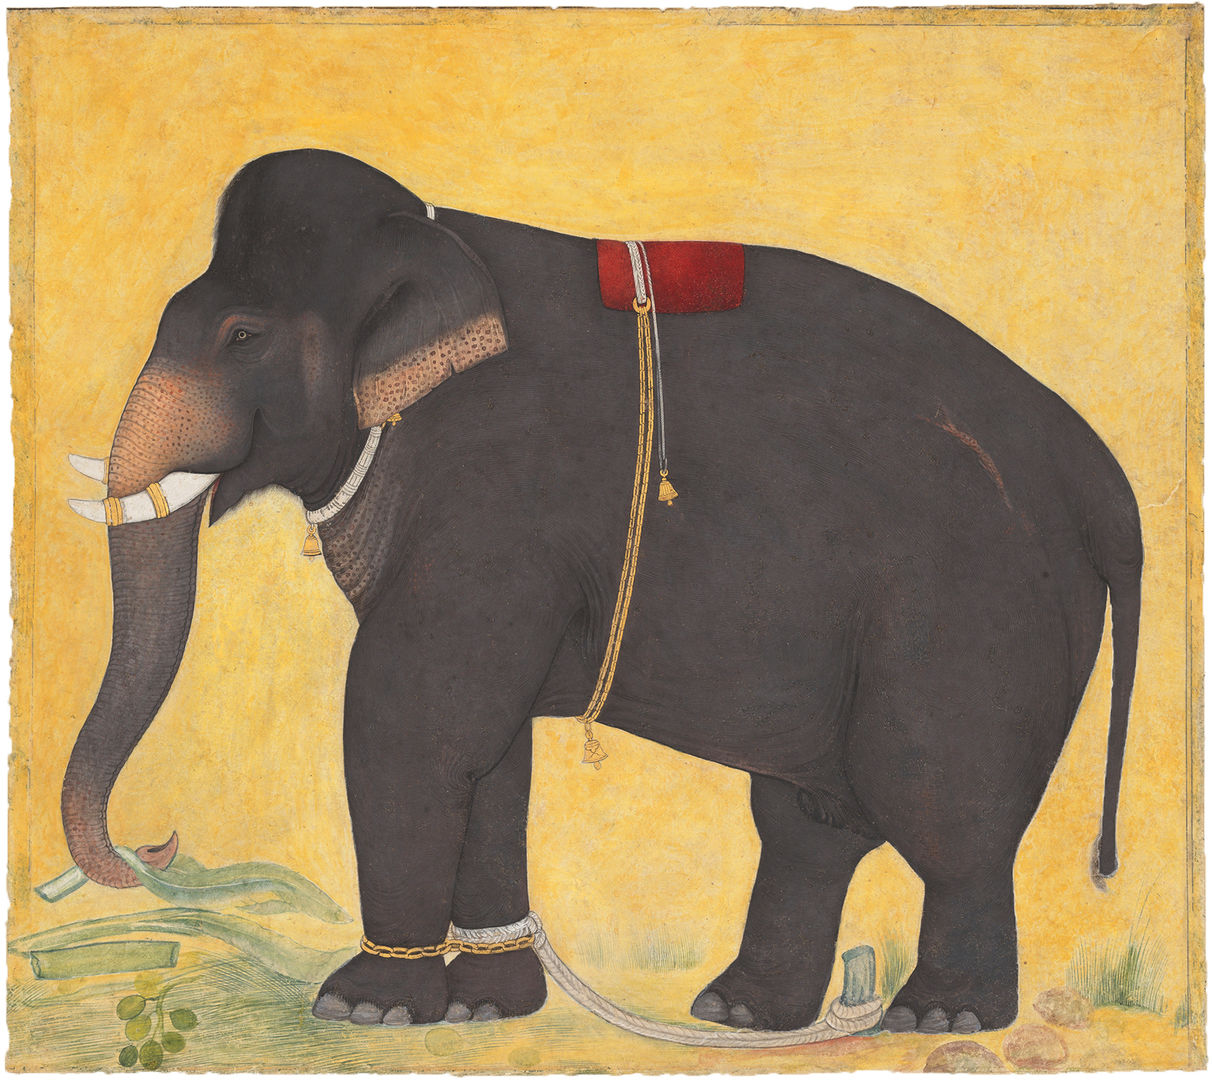 Painting of an elephant eating leaves against yellow background